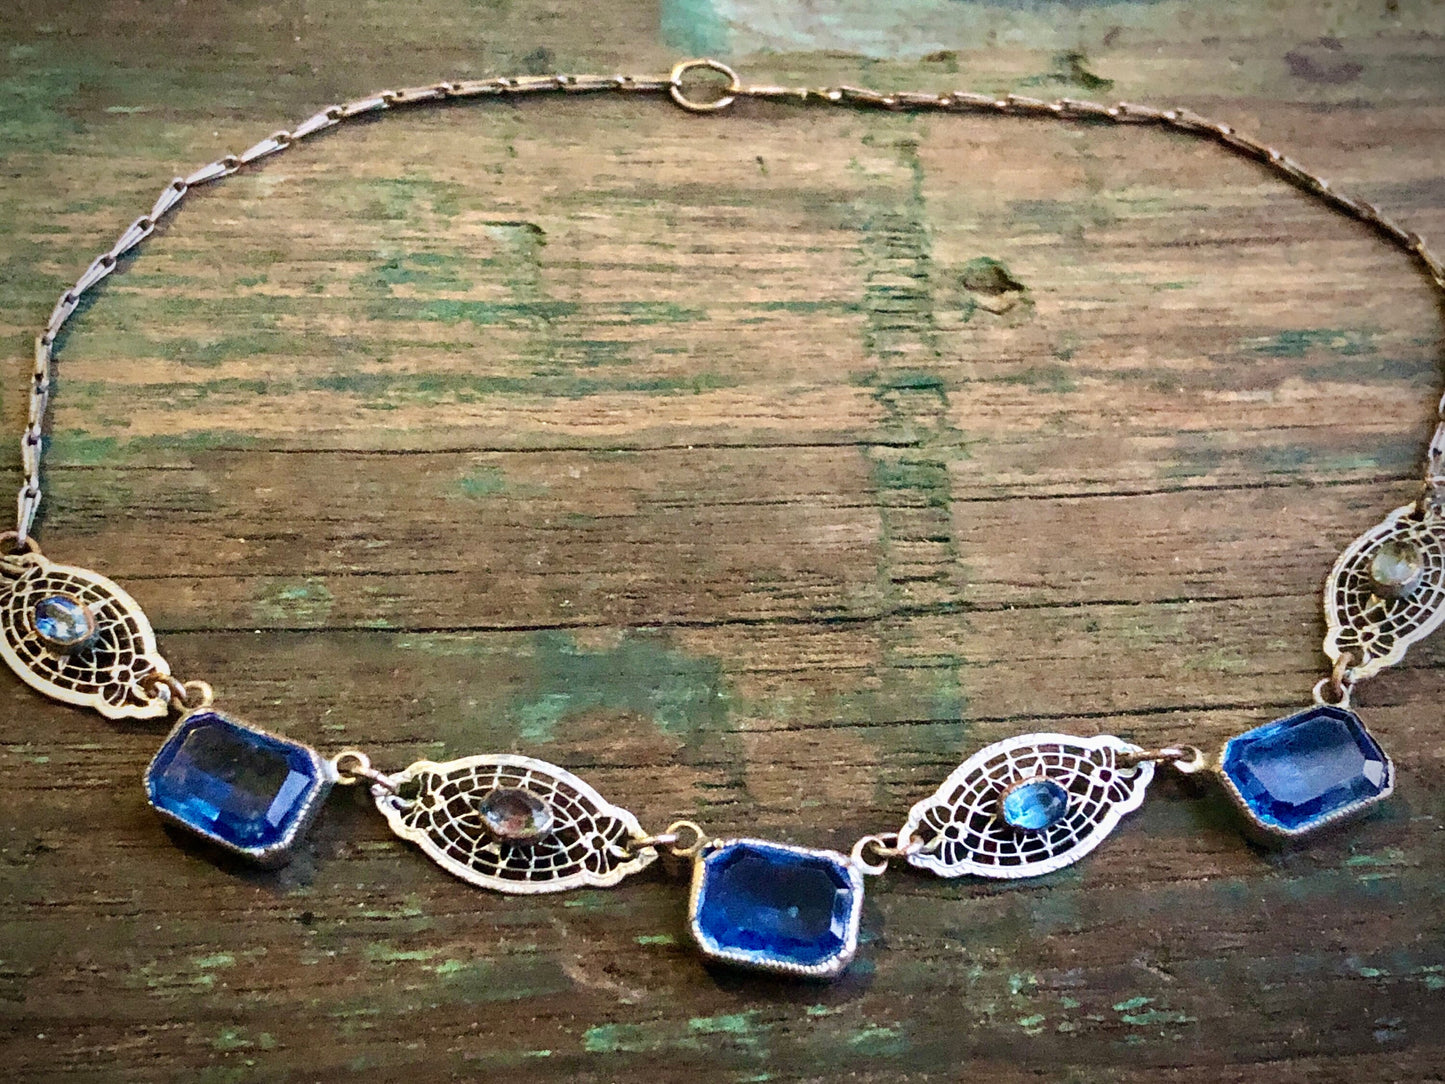 Antique Rhodium Plated Brass Filigree Necklace with Blue Paste Stones